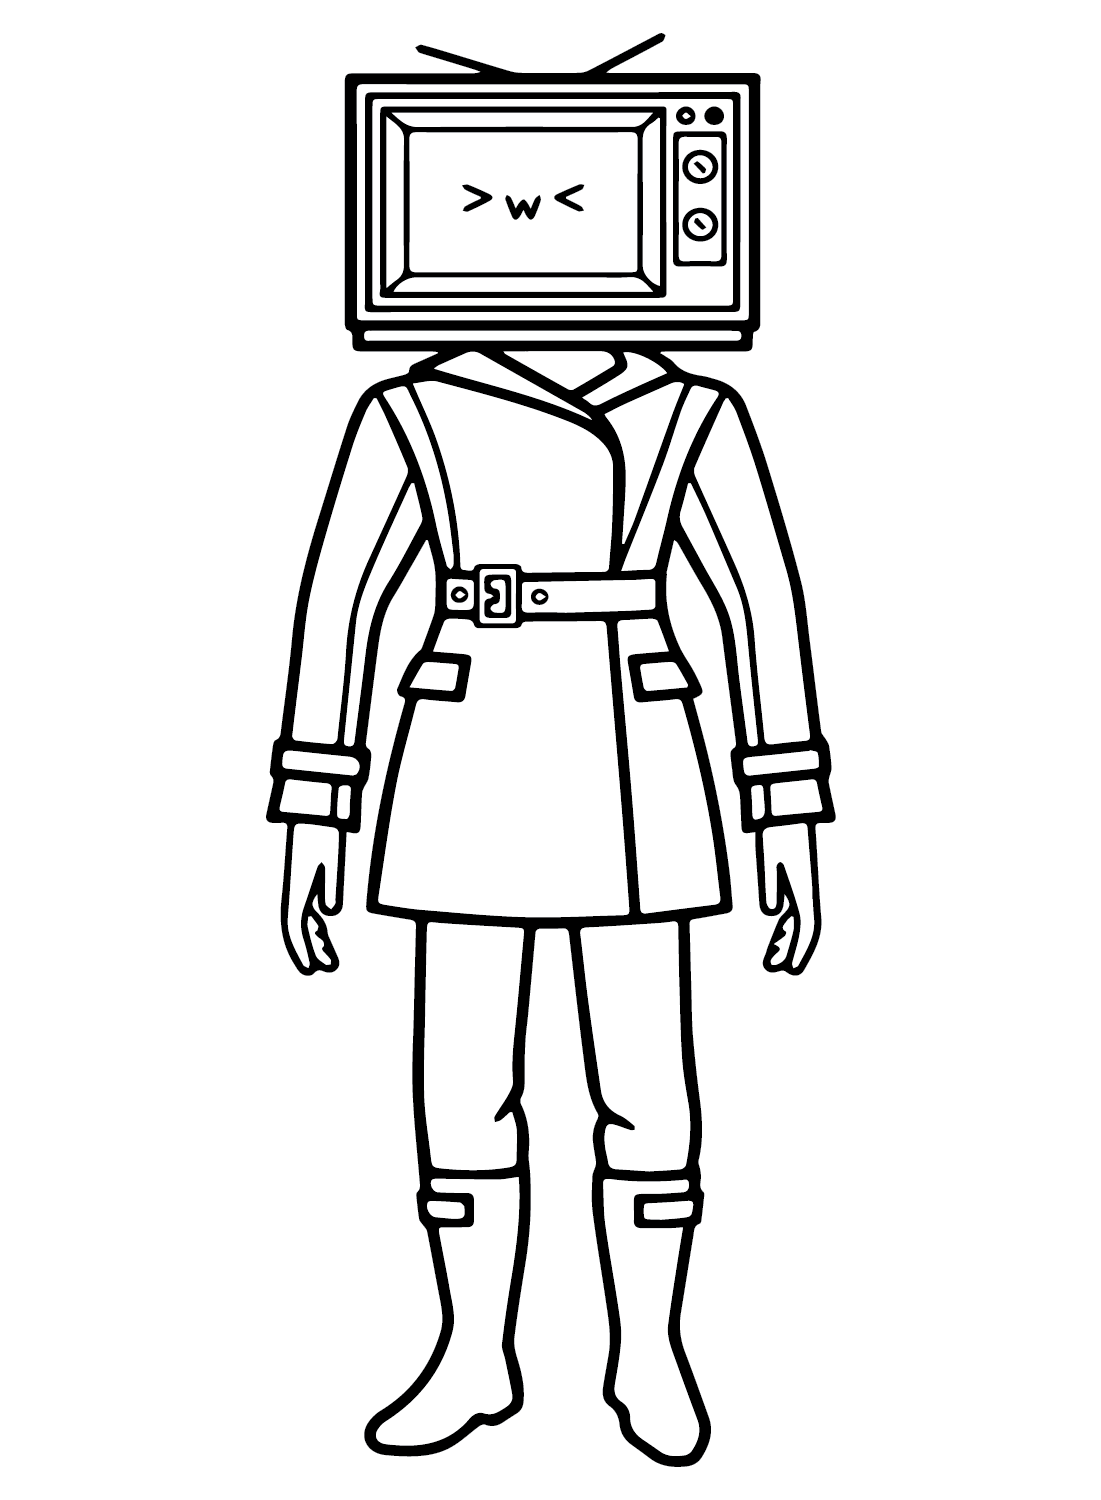 TV Woman Coloring Sheet for Kids - Free Printable Coloring Pages